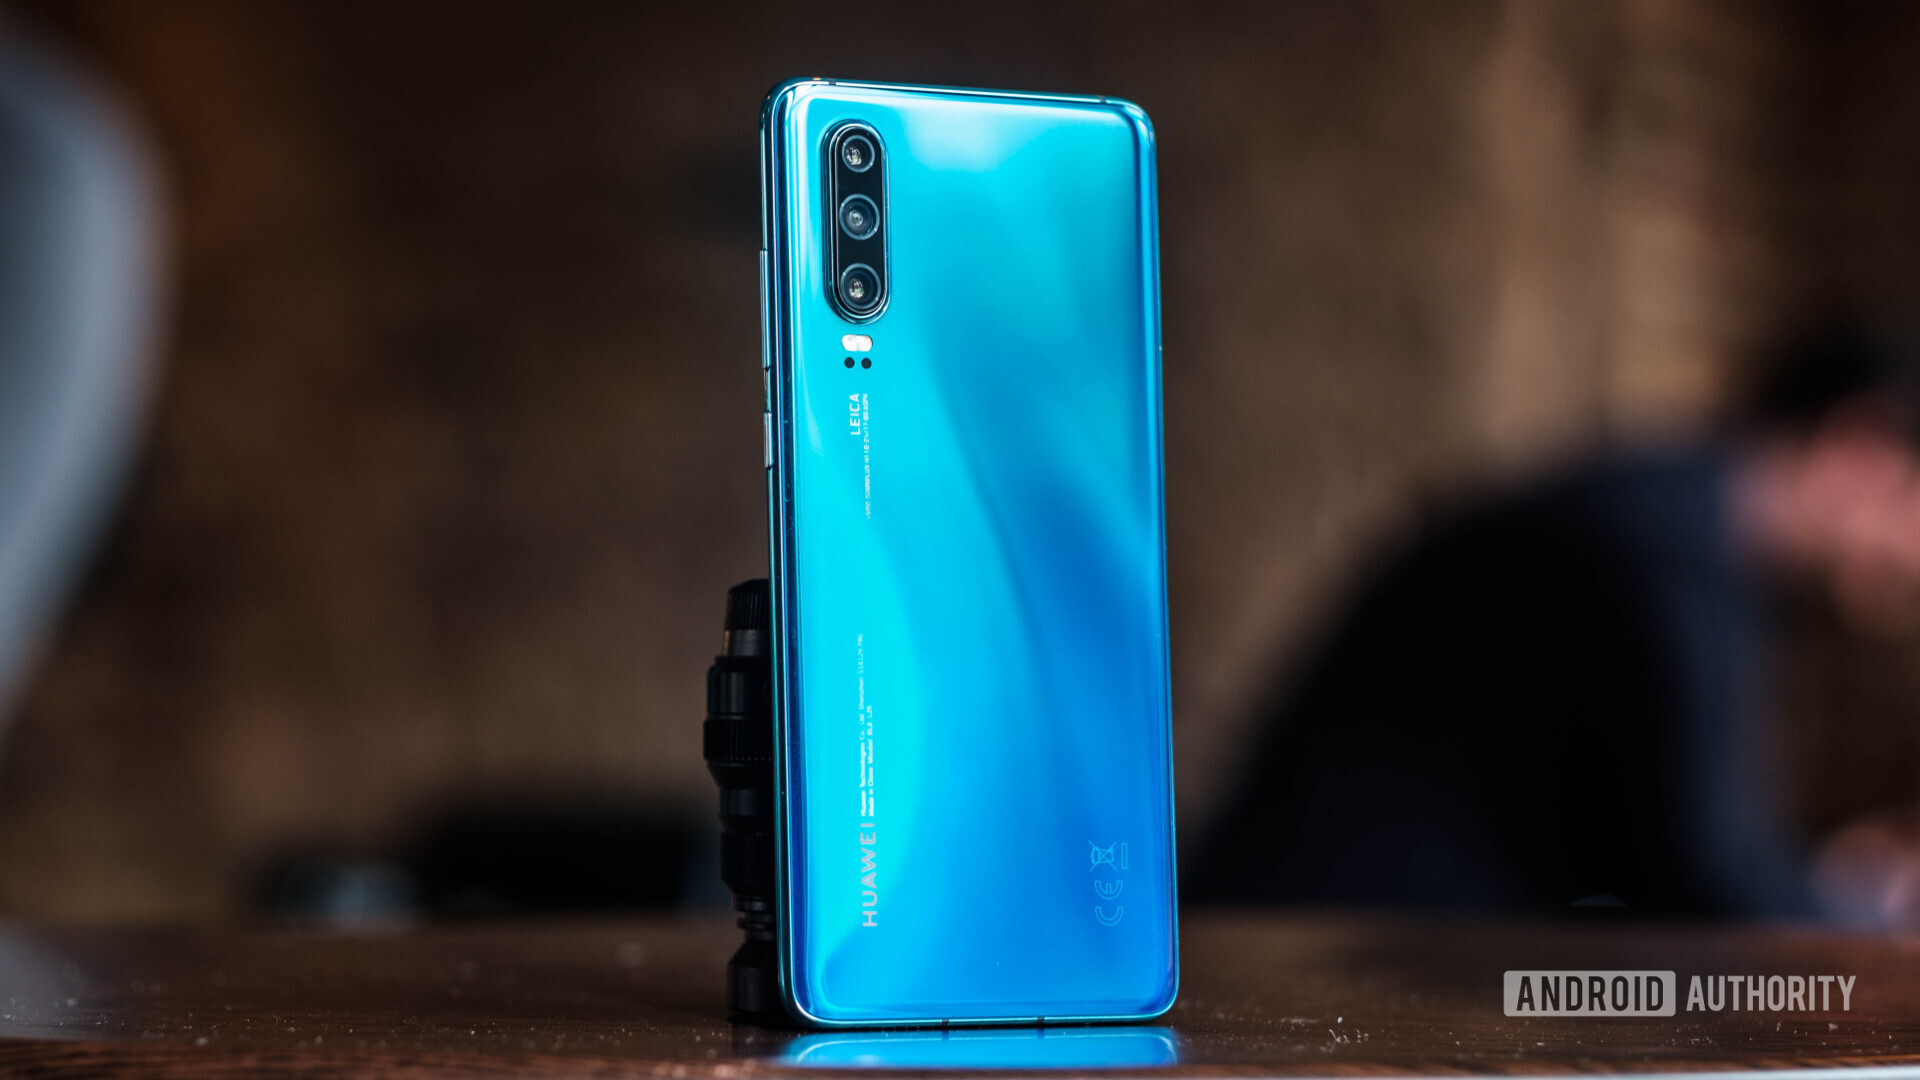 The HUAWEI P30 series and HONOR 20 series will get Android Q